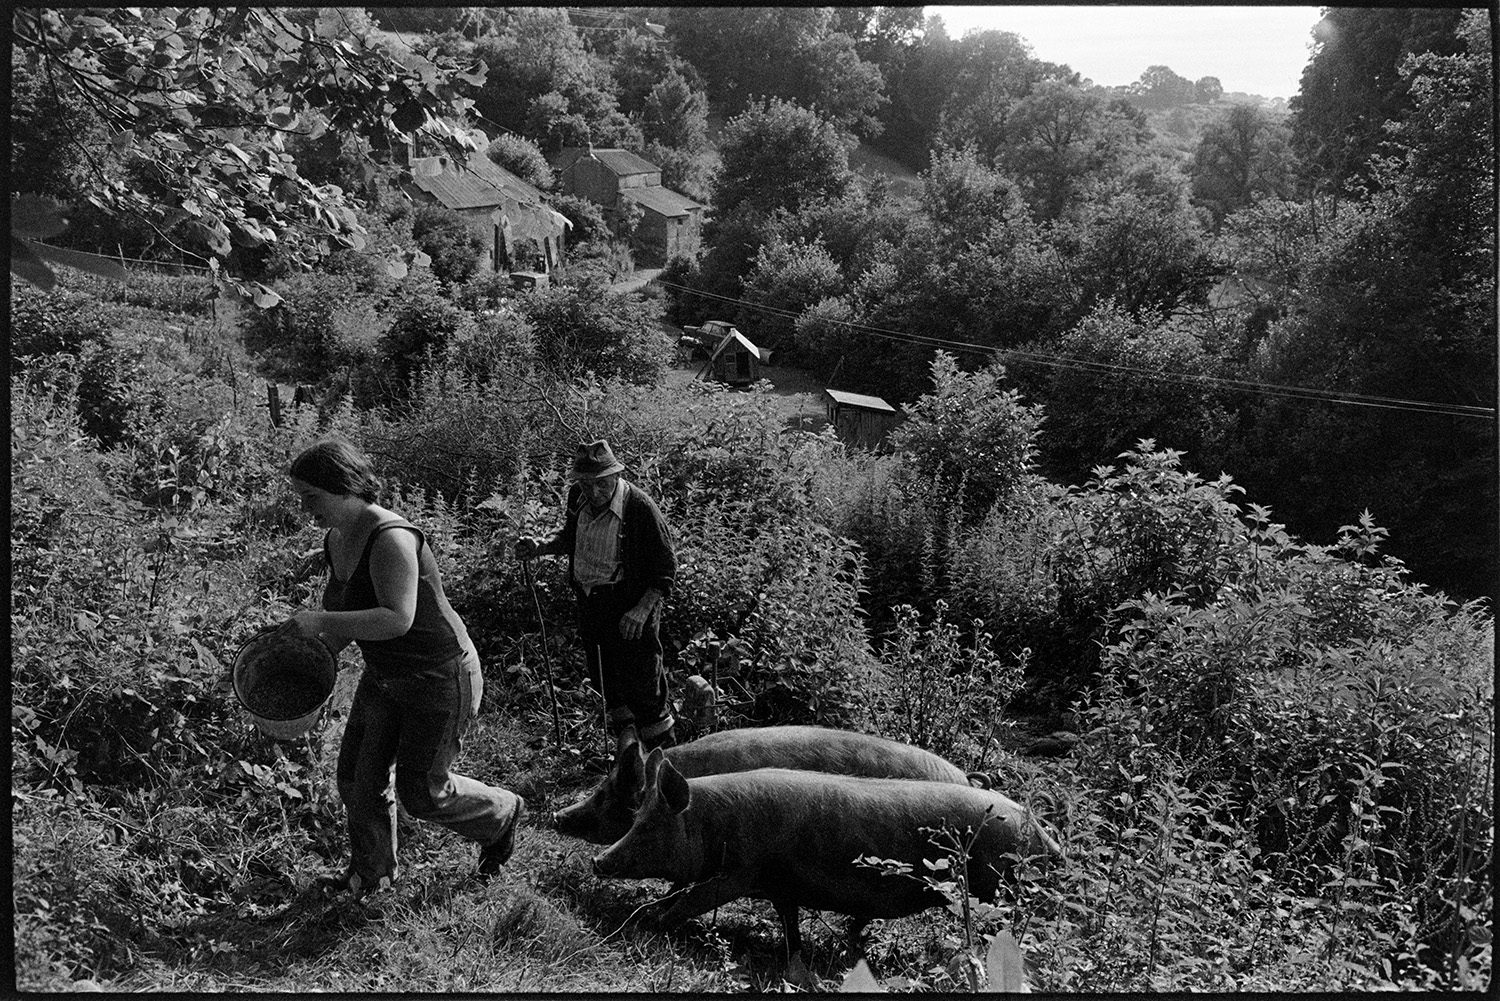 Feeding pigs and checking fences. 
[Archie Parkhouse and a woman feeding pigs in an overgrown area at Millhams, Dolton. Archie is smoking a pipe. Woodland and cottages are visible in the valley in the background.]